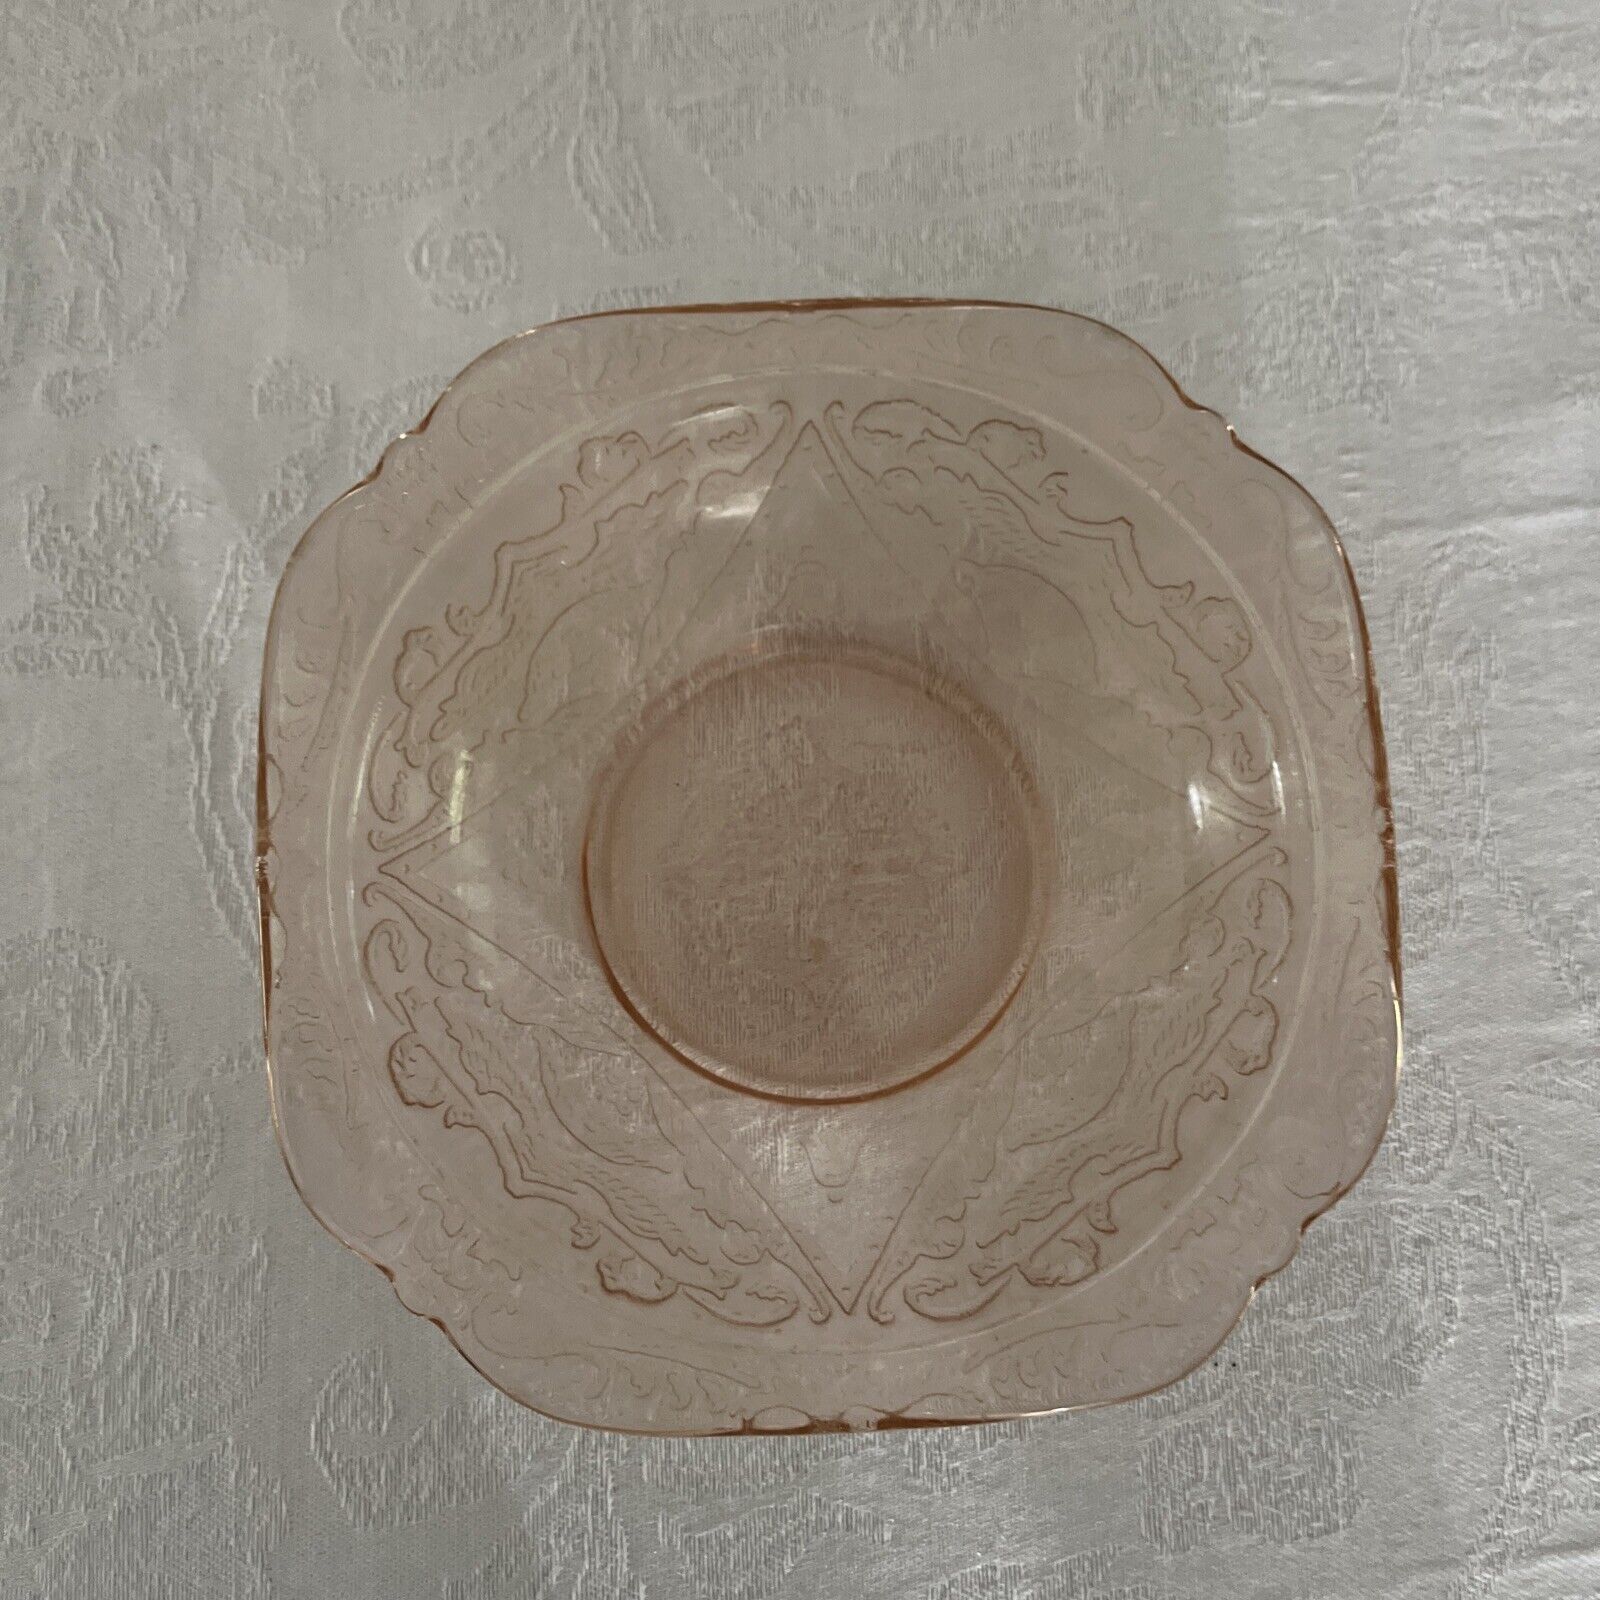 Pink Madrid Depression Glass Bowl by Federal Glass Co. 1930's